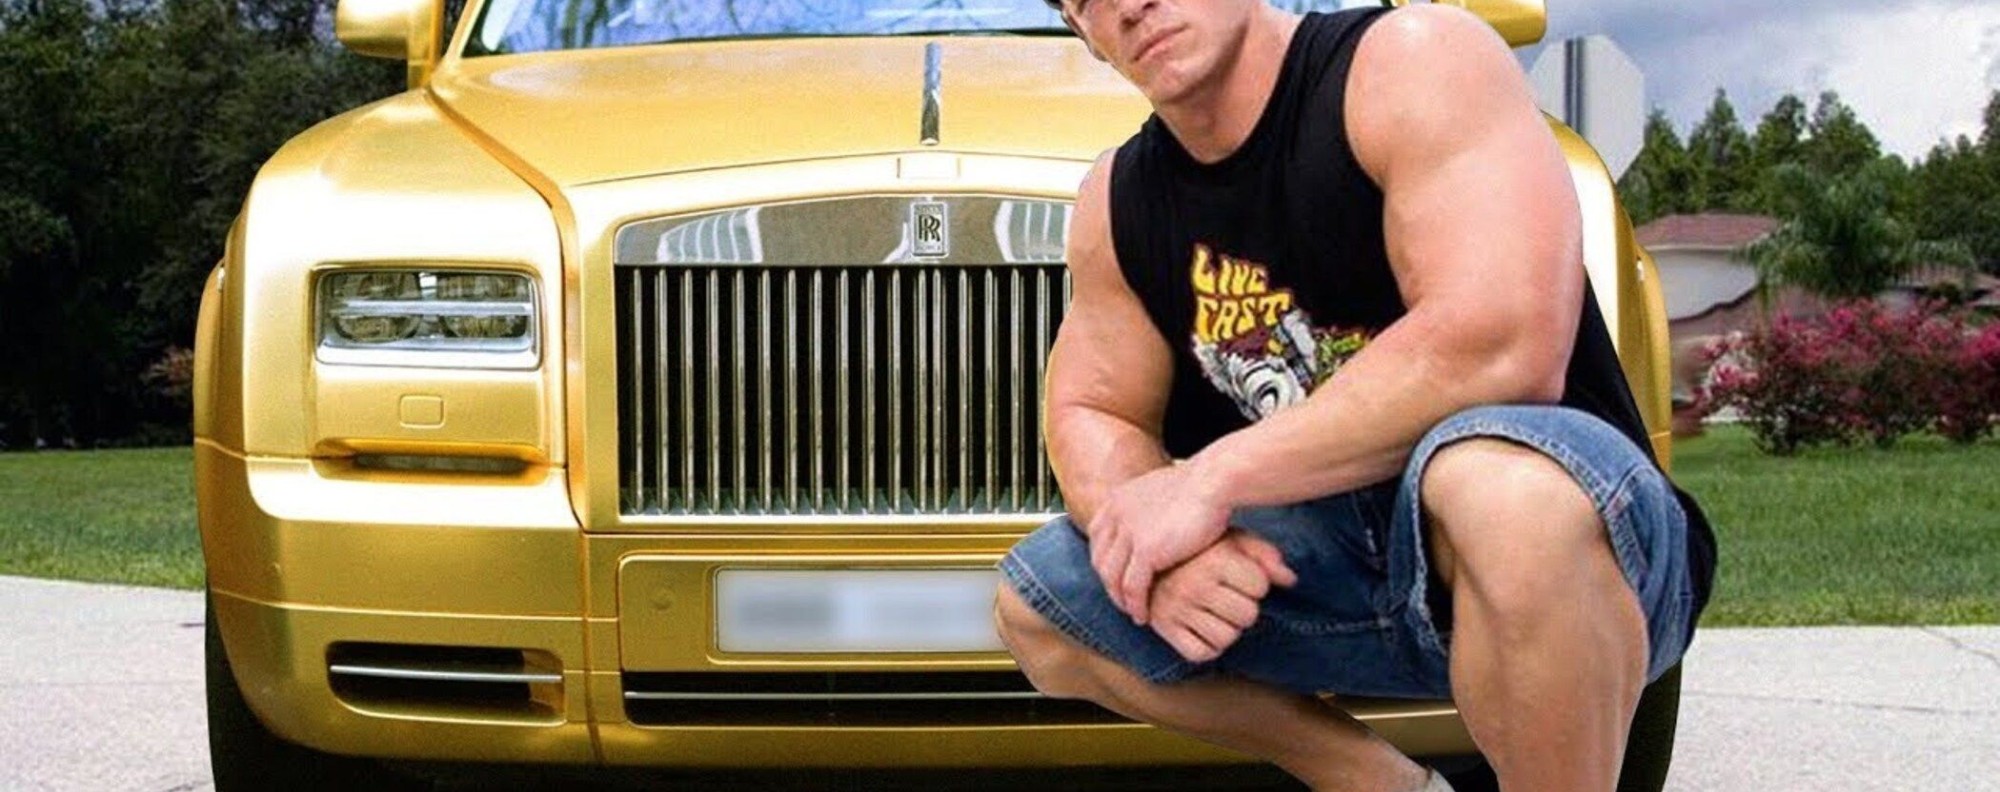 How F9's John Cena his US$60 million worth – and how the WWE superstar it (hint: on flashy cars) | China Morning Post